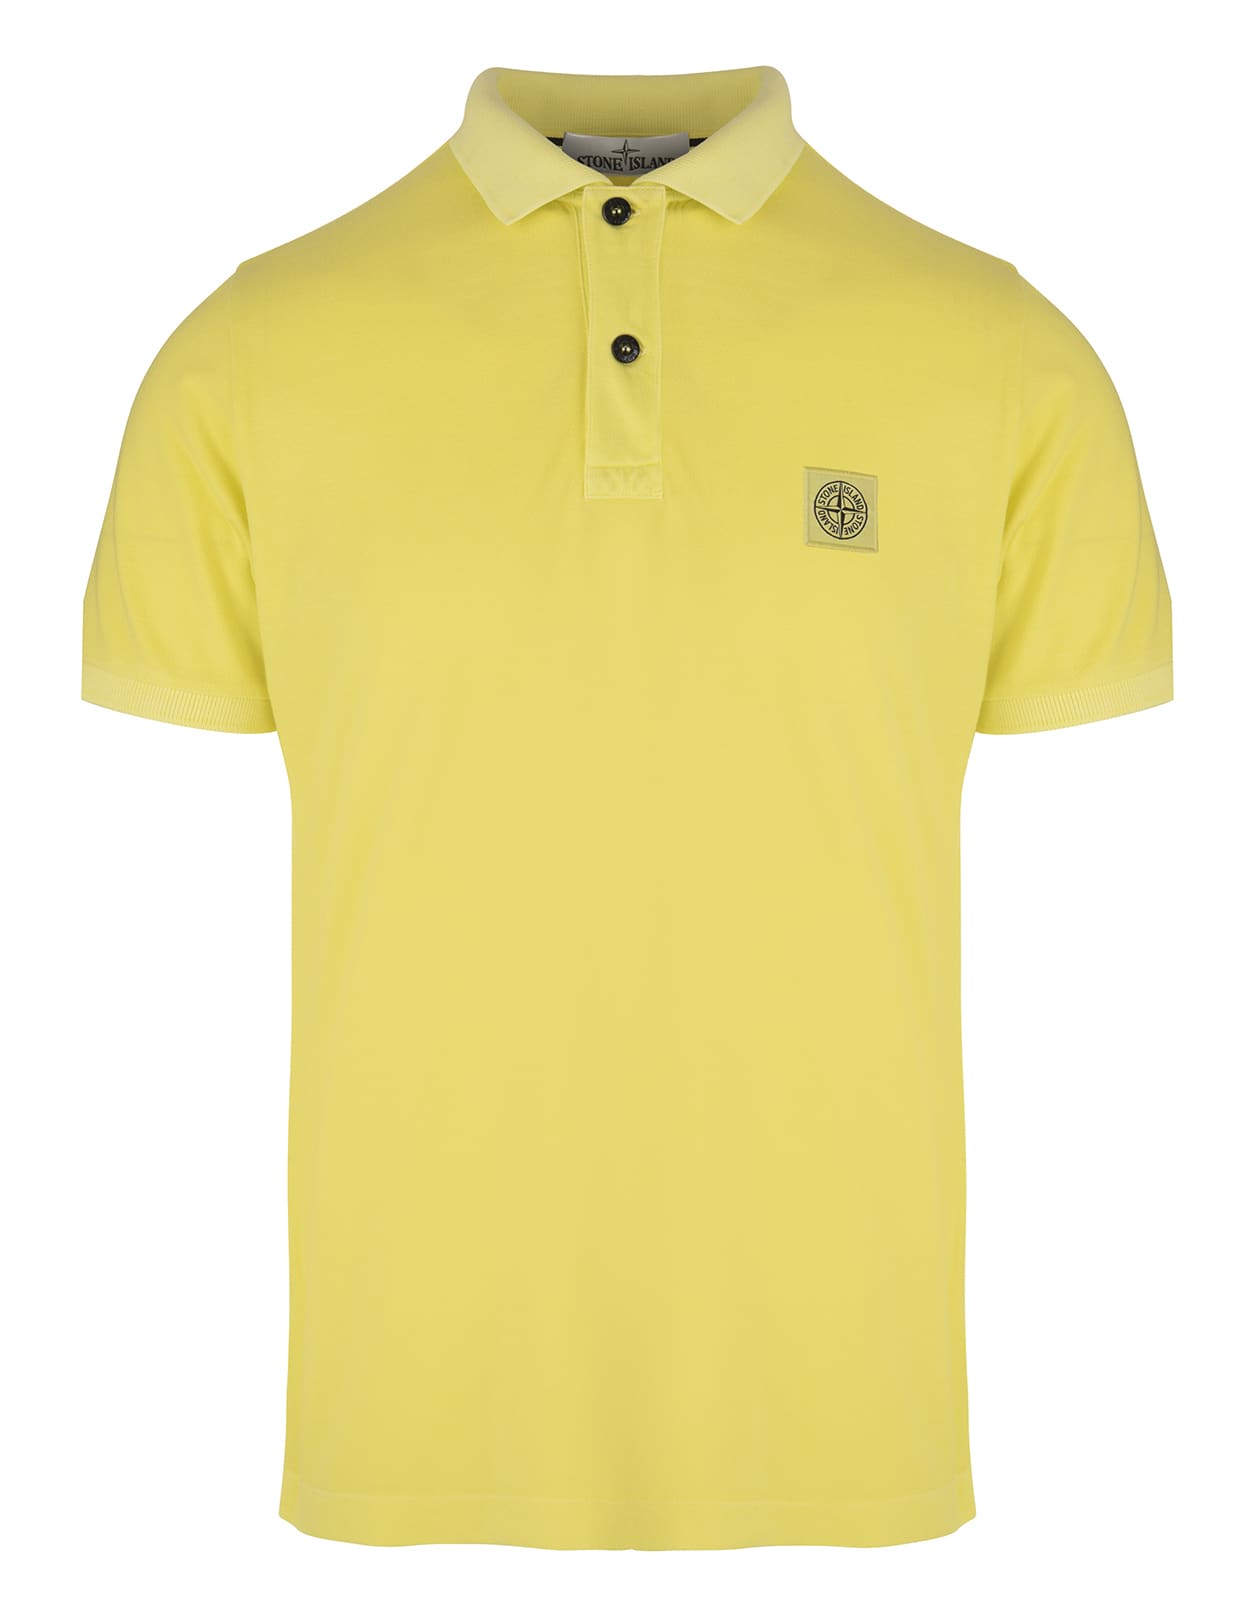 STONE ISLAND MAN POLO SHIRT IN YELLOW COTTON PIQUET WITH STONE ISLAND COMPASS ROSE PATCH